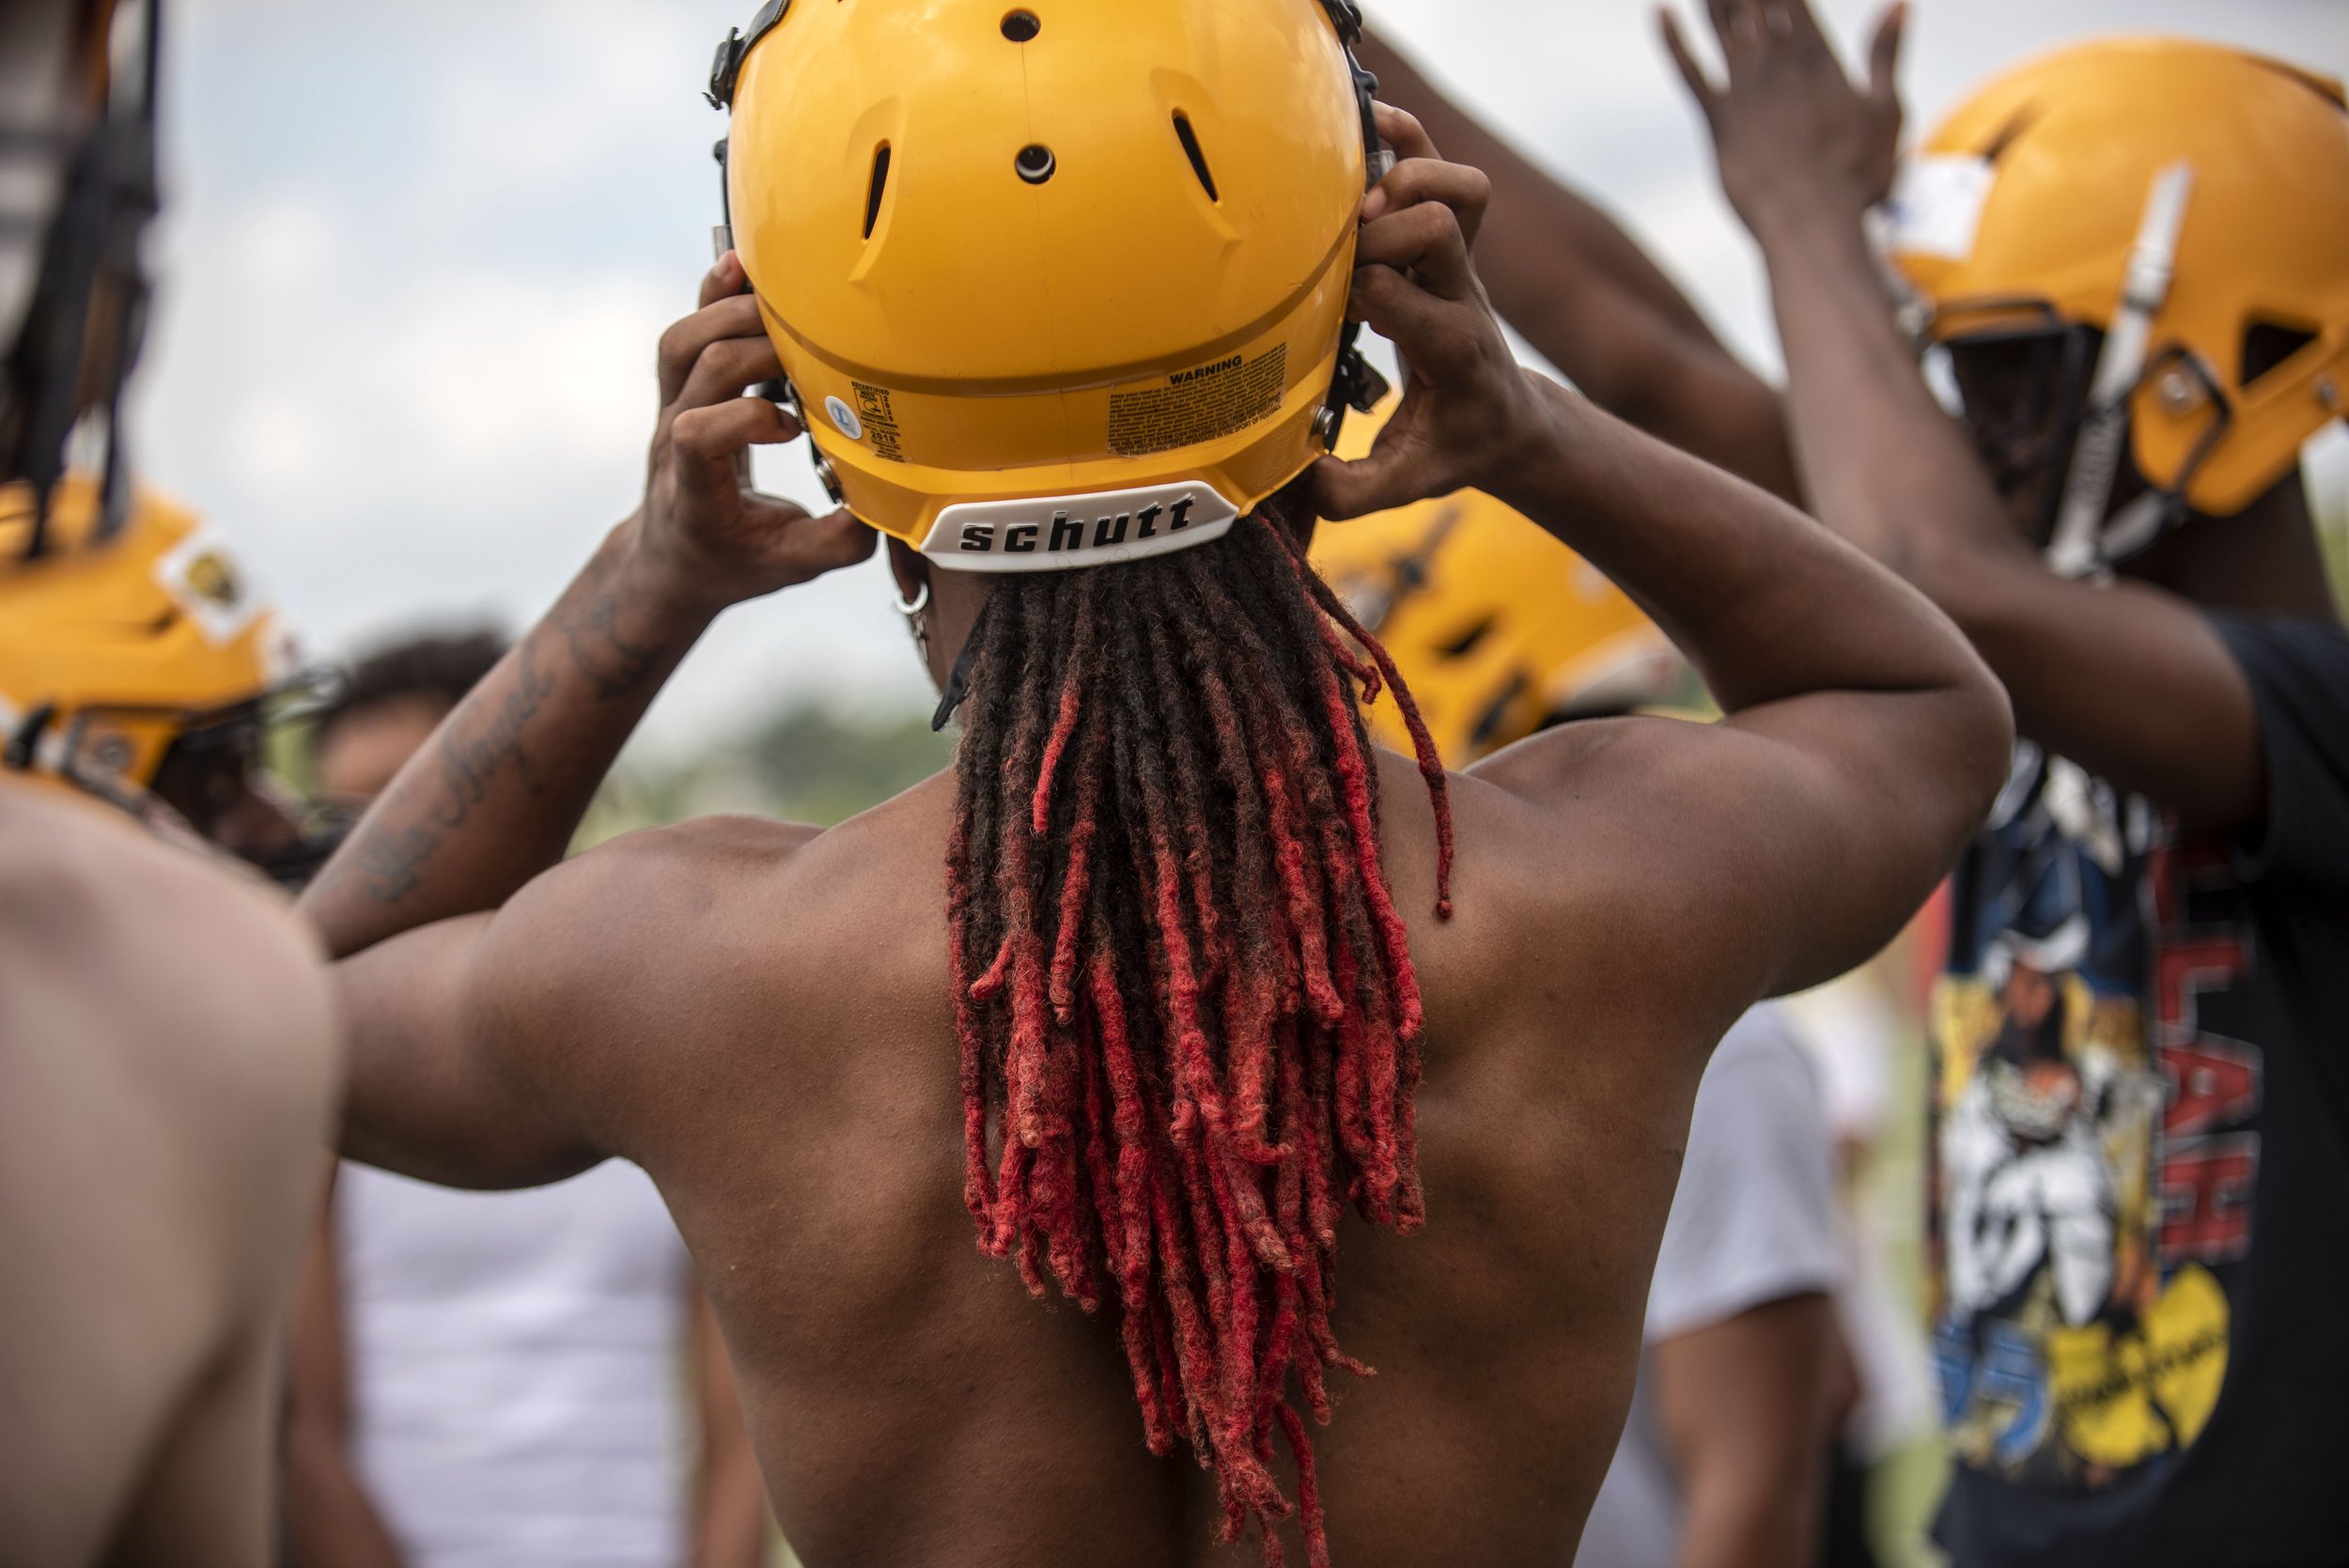  Senior O'Marion Davis adjusts his helmet as the first football practice of the season begins at Battle Creek Central High School on Monday, Aug. 10. 